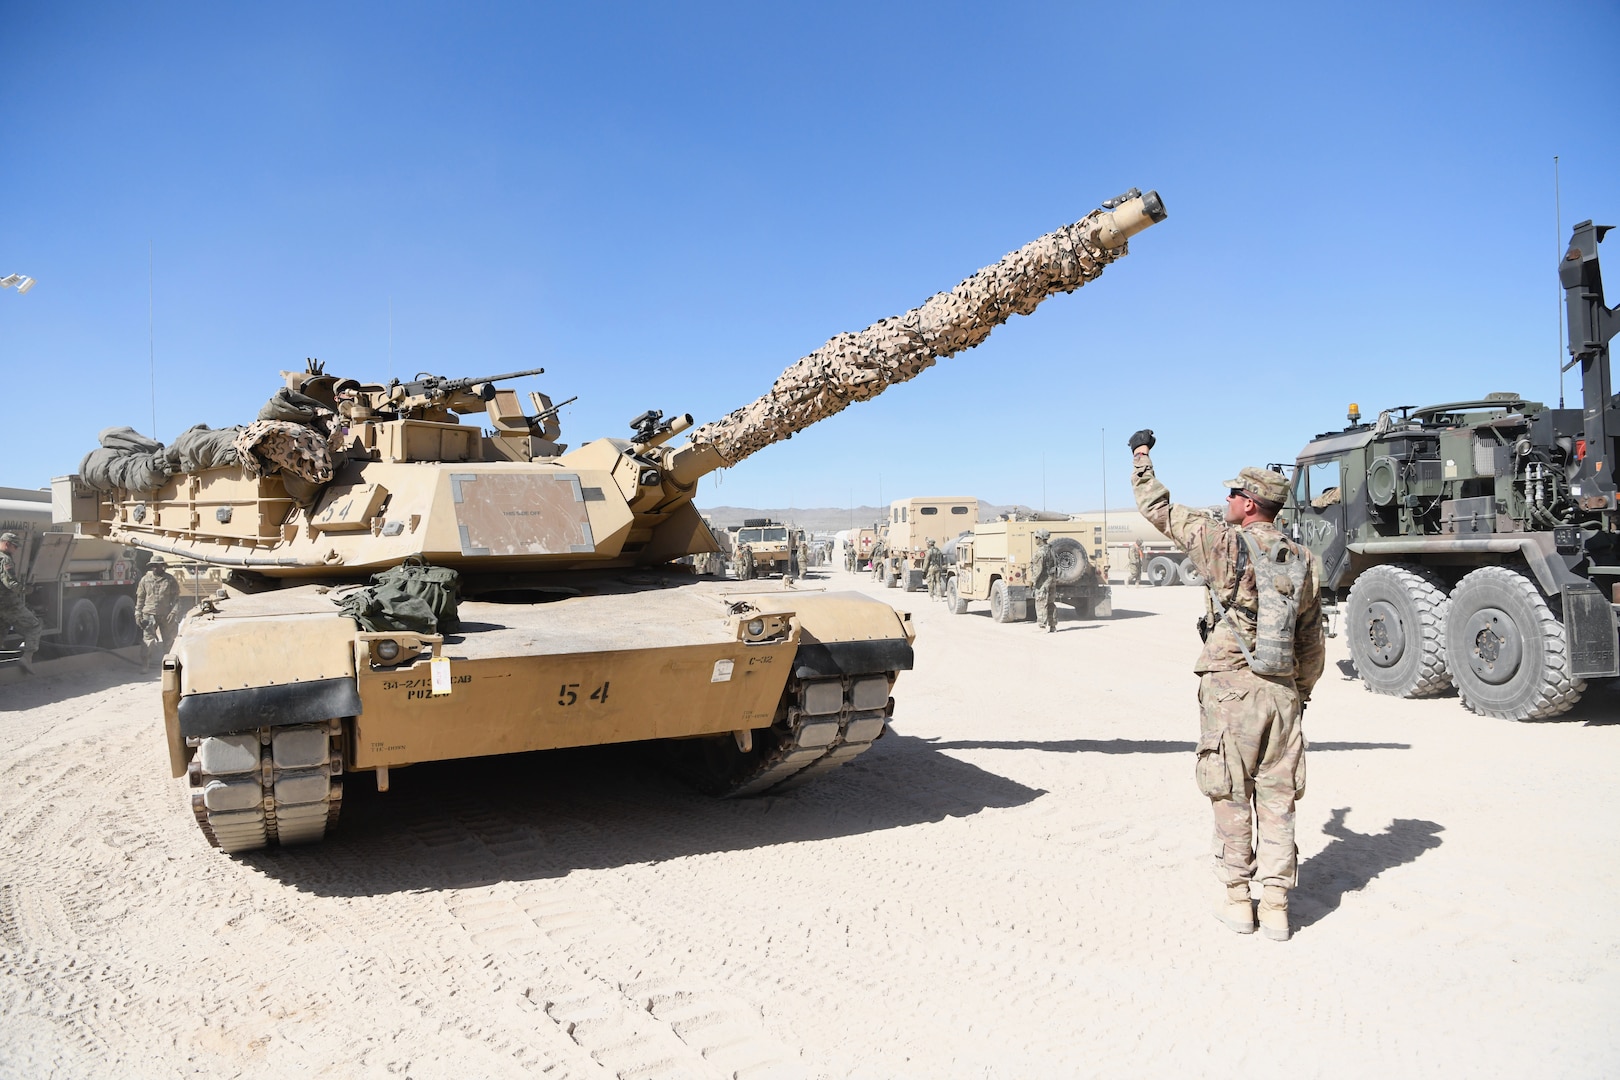 Soldiers with the Minnesota National Guard’s 1st Armored Brigade Combat Team prepare for the field during a rotation at the National Training Center at Fort Irwin, California, July 15, 2020. The exercise, directed by U.S. Army Forces Command, serves as the final major training event ahead of the brigade’s 2021 deployment to the Middle East.